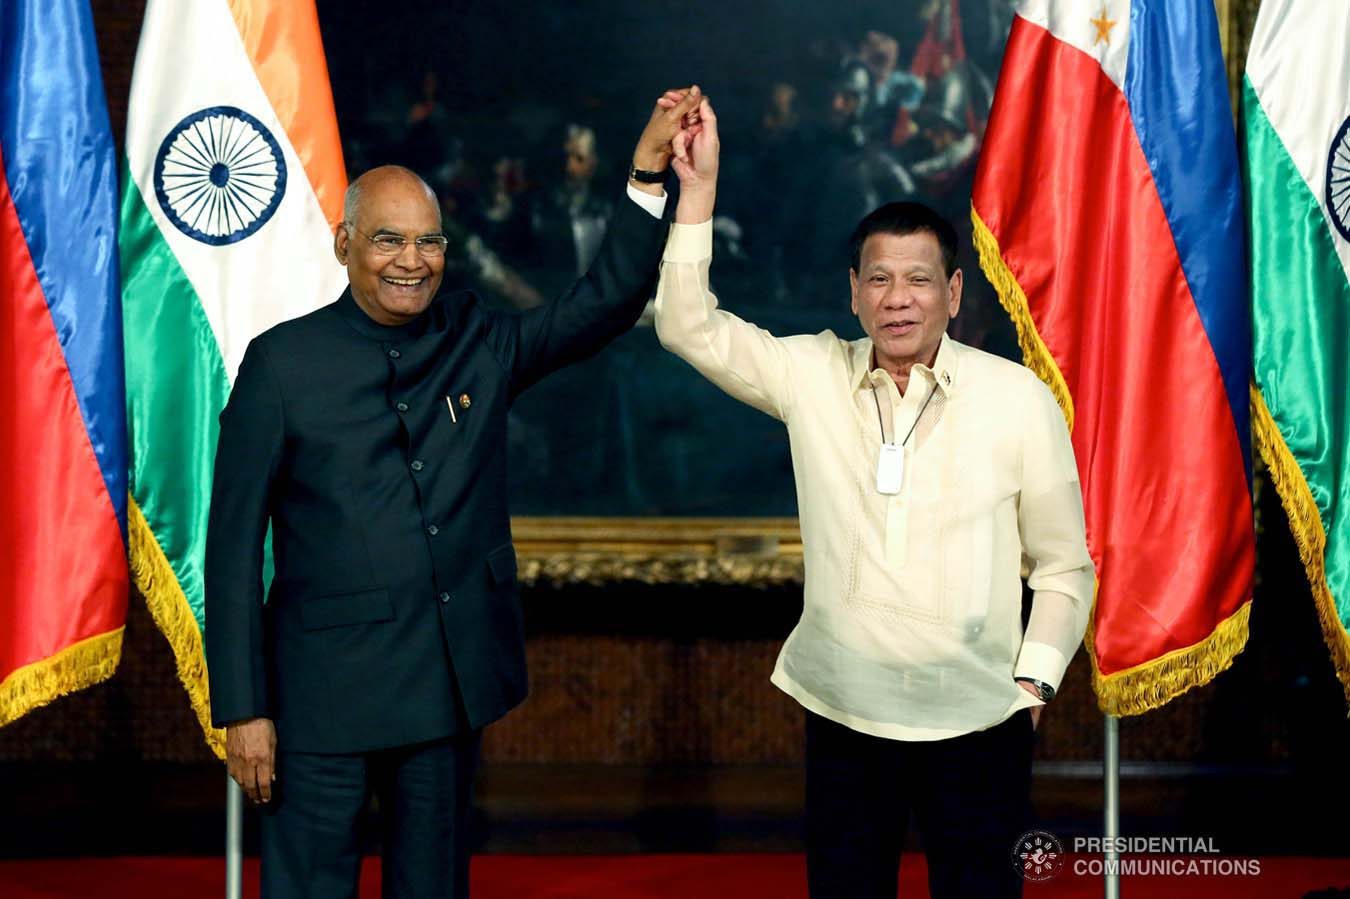 President Rodrigo Roa Duterte gets his hand raised by President of the Republic of India Ram Nath Kovind after declaring their joint press statements following the successful expanded bilateral meeting at the Malacañan Palace on October 18, 2019. President Kovind is on a five-day state visit to the Philippines. RICHARD MADELO/PRESIDENTIAL PHOTO